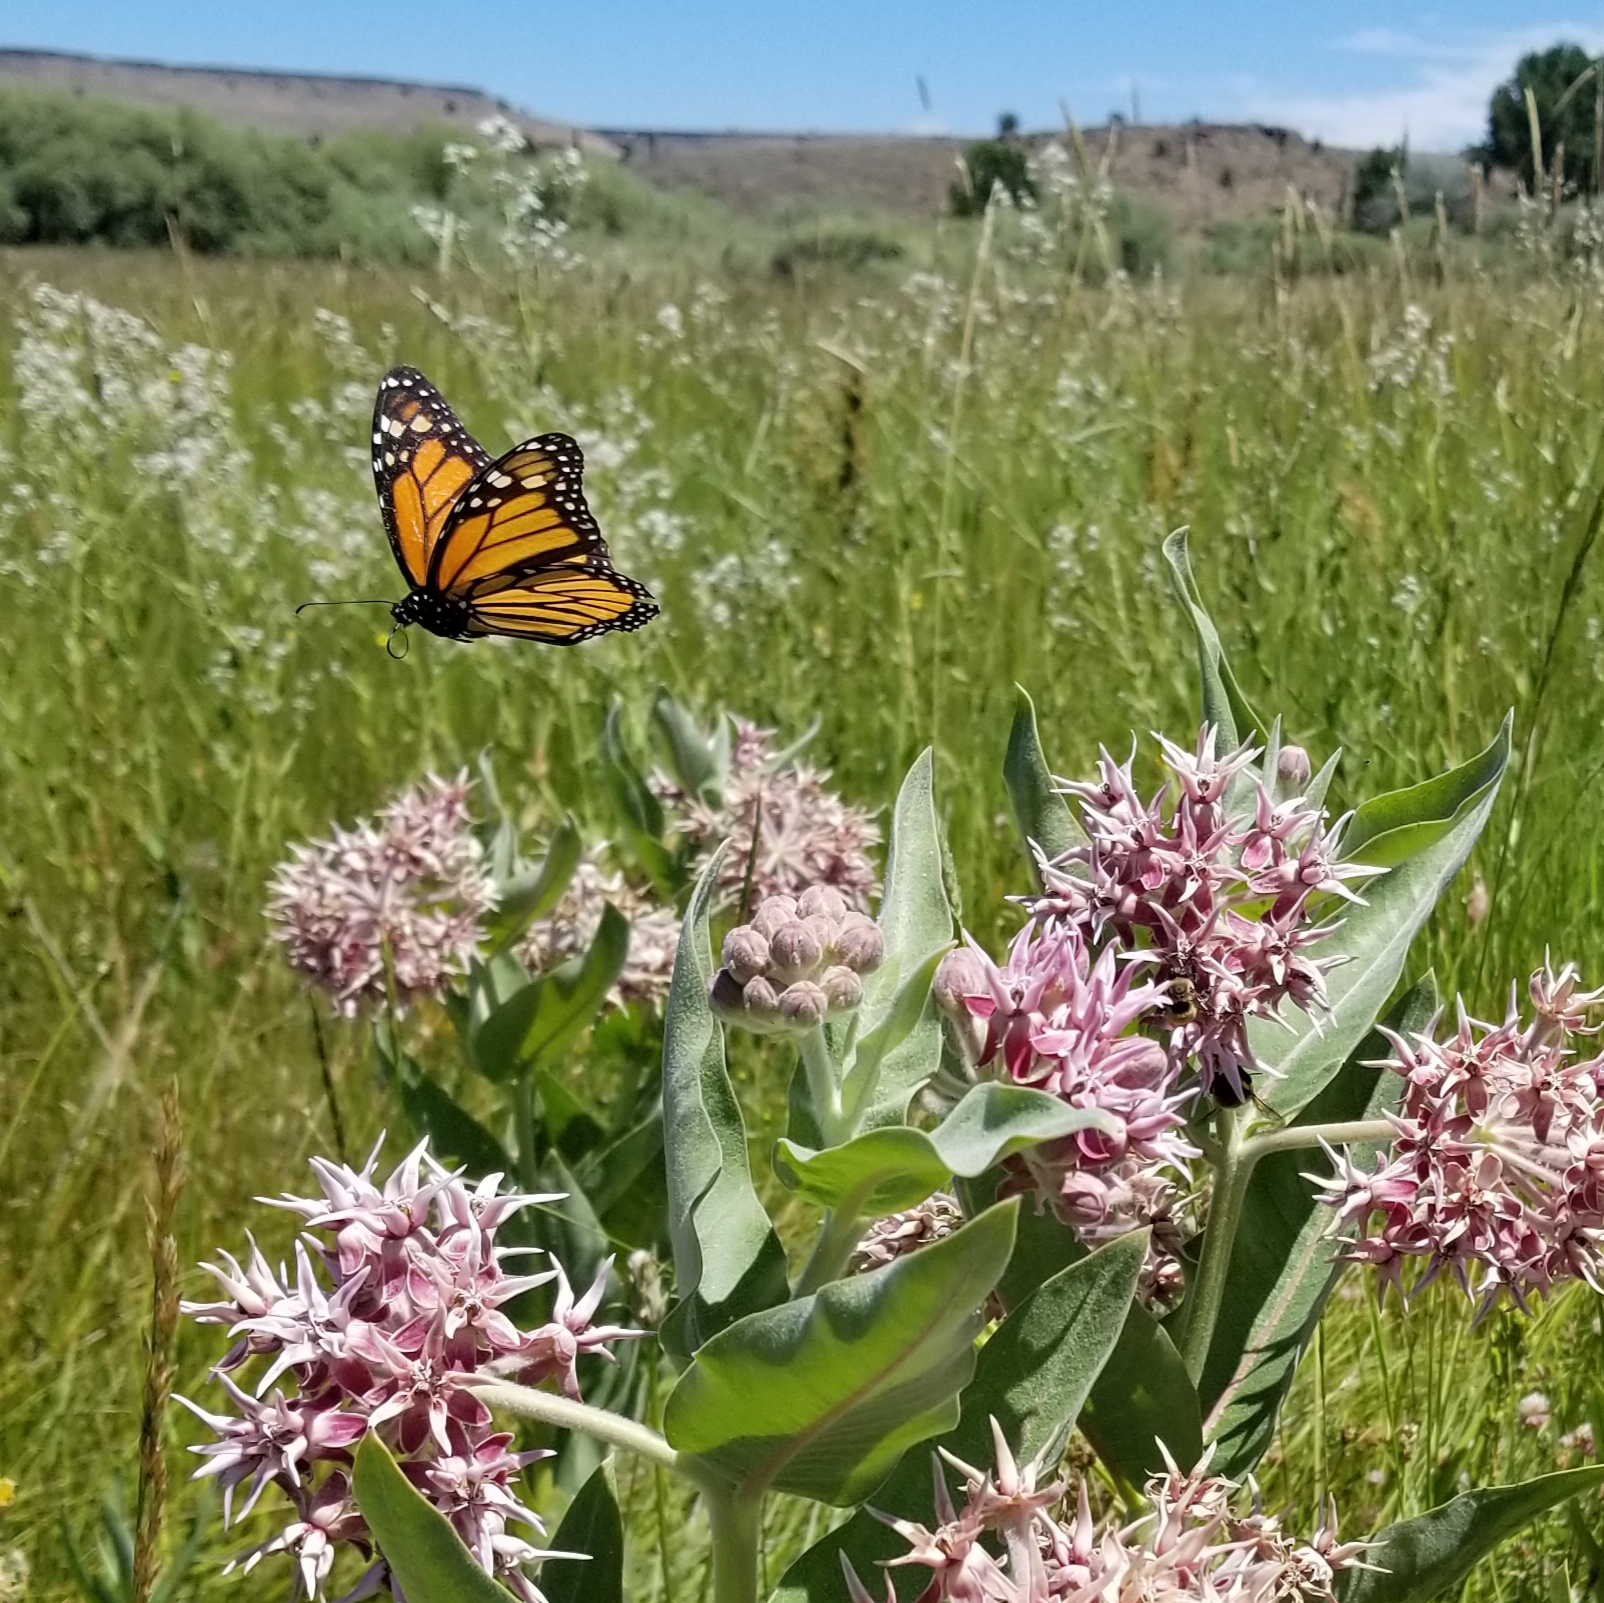 A monarch hovers above blooming pink milkweed flowers in a grassy field.